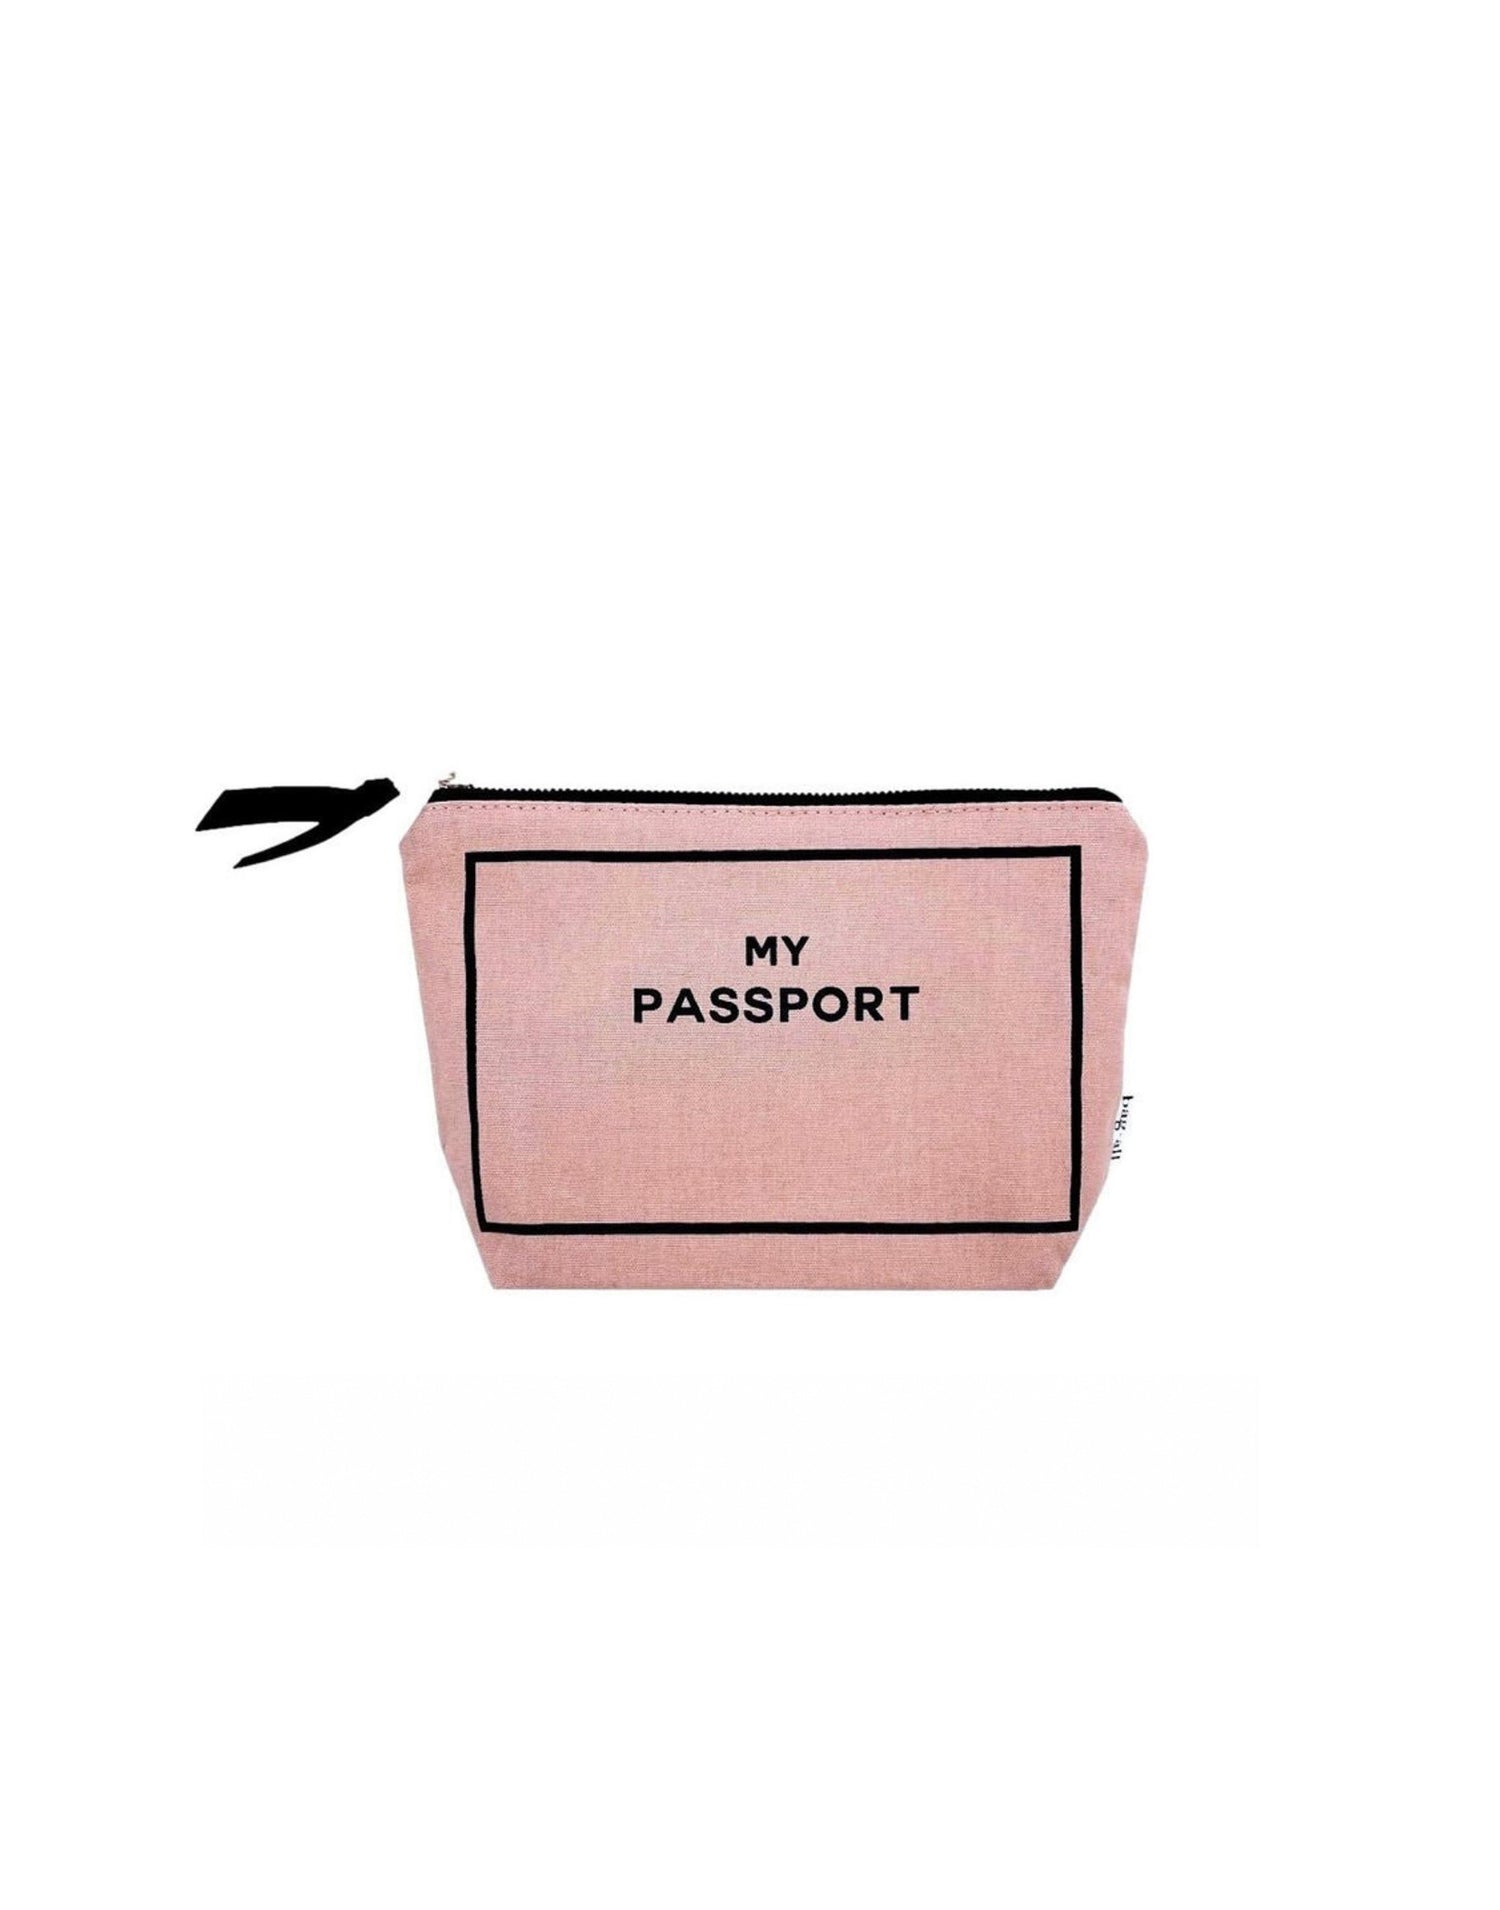 My Passport Case in Pink by Bag-all - Alternate Product View